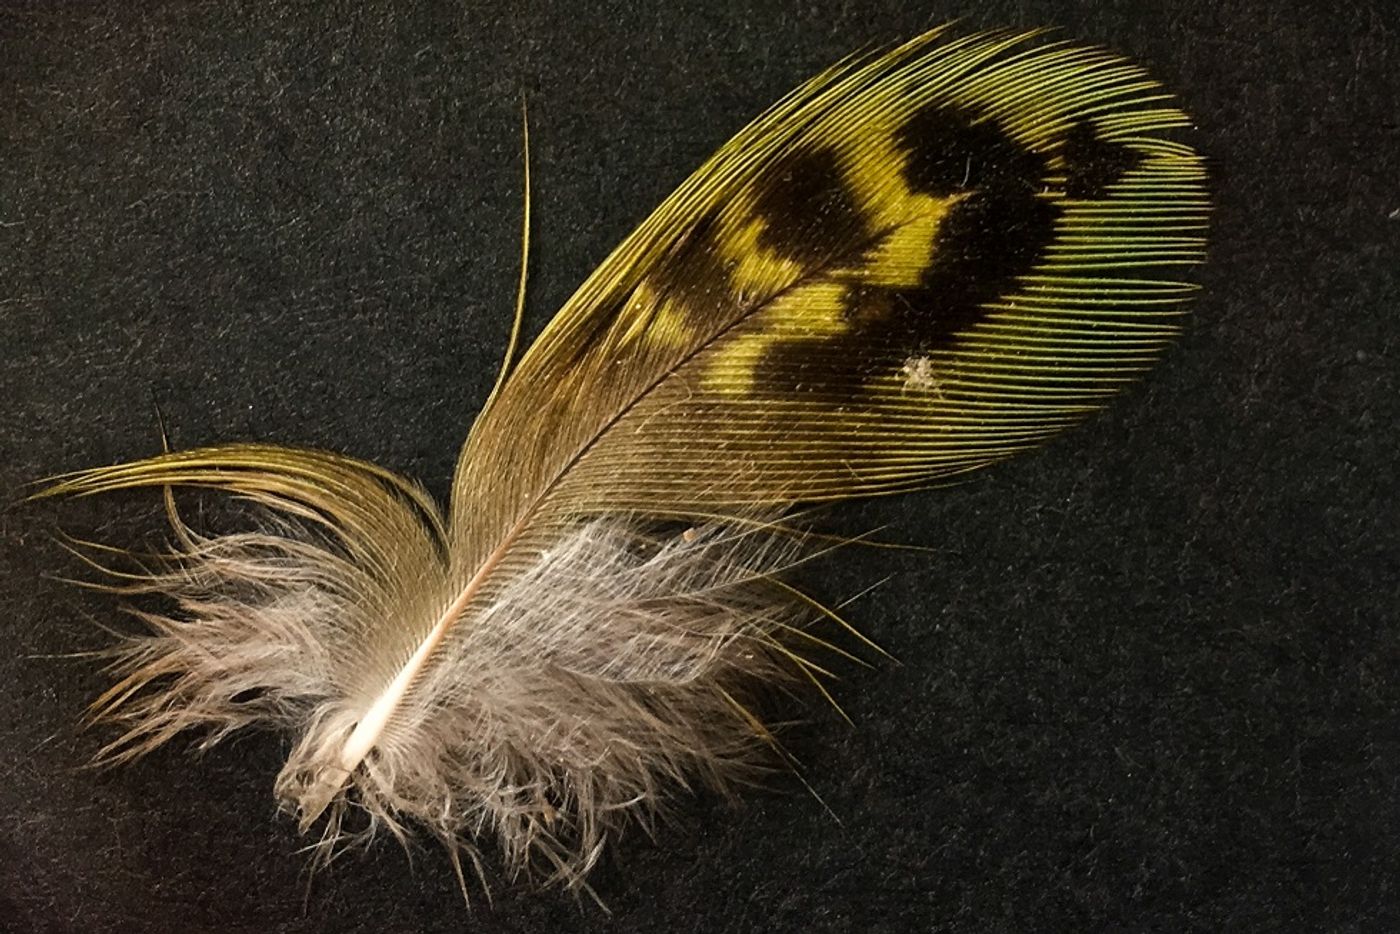 The night parrot's feather.